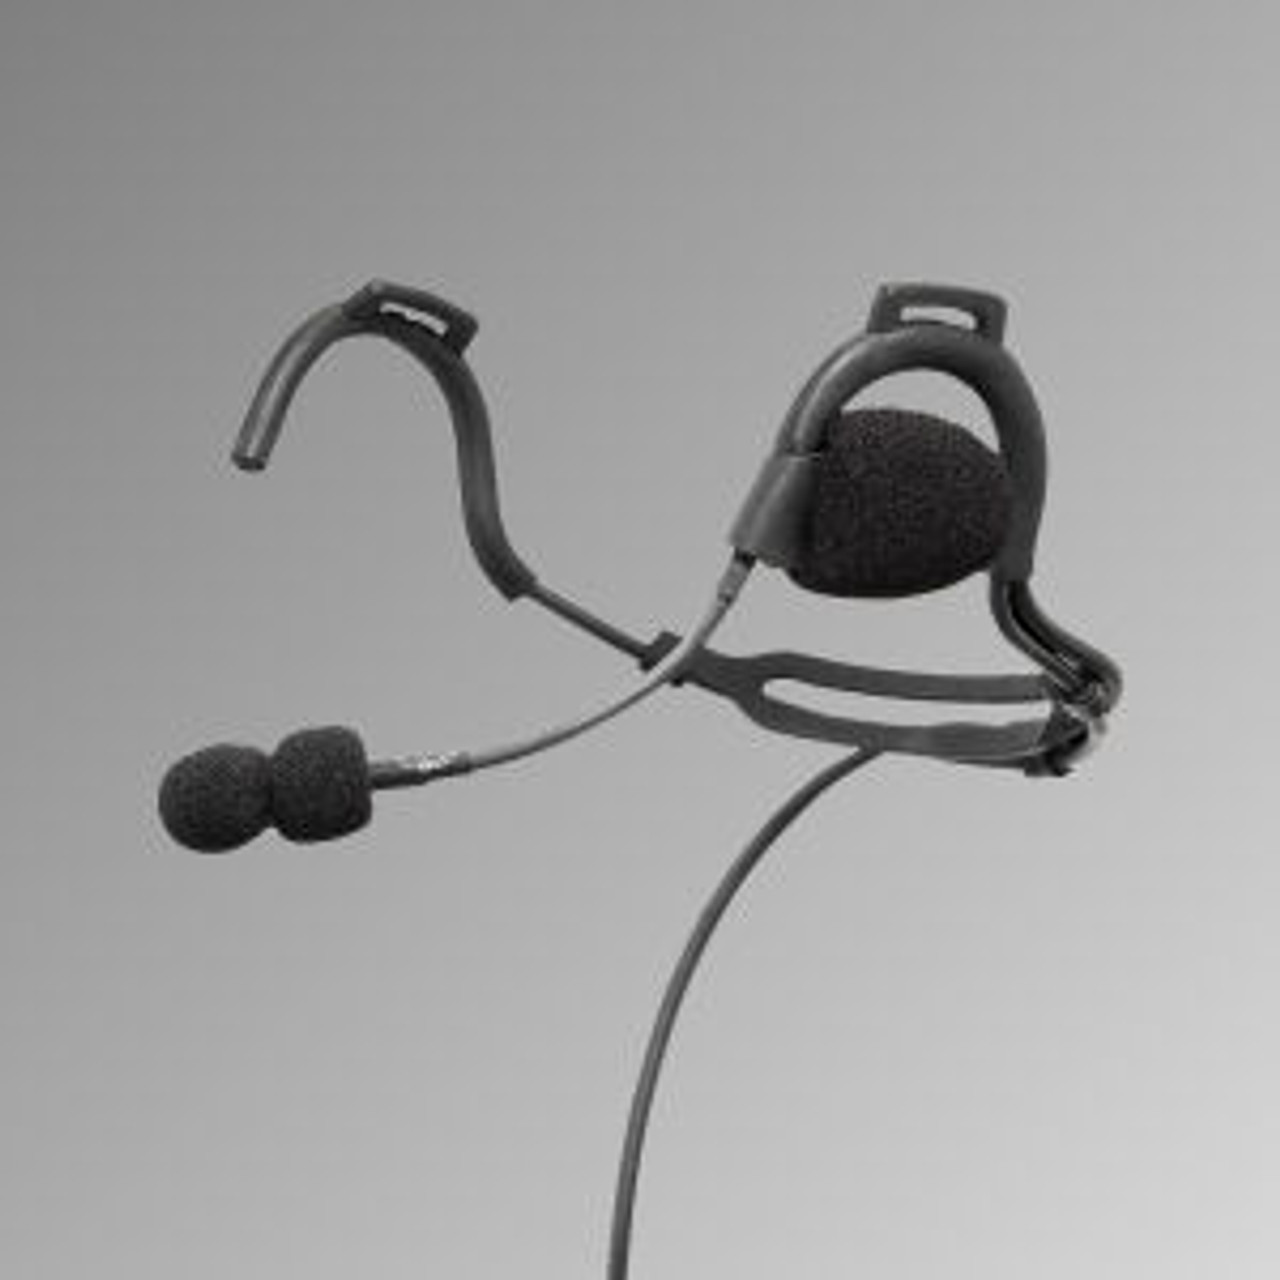 Otto Ranger Headset For Kenwood TH-D74A Radios